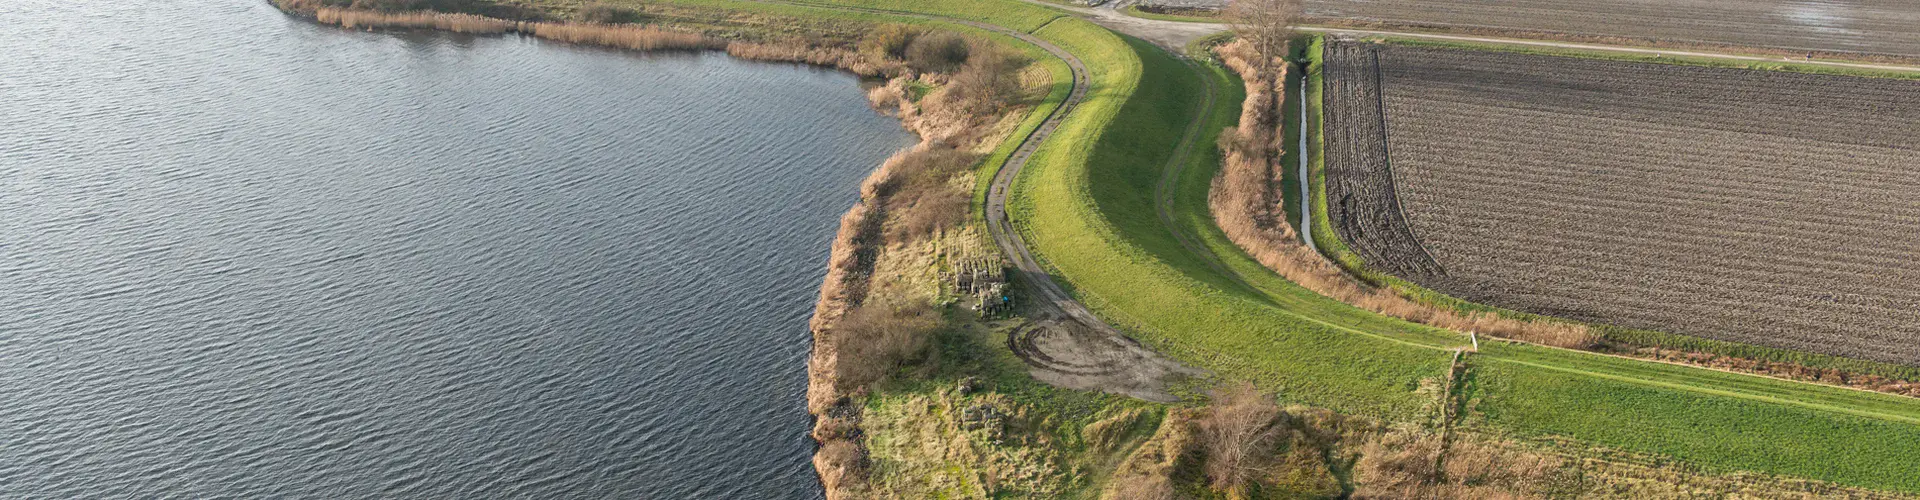 Aerial view of a seawall in the Netherlands protecting farmland that is below sea level. (Credit: Rijkswaterstaat, Ministry of Infrastructure and the Environment, the Netherlands)